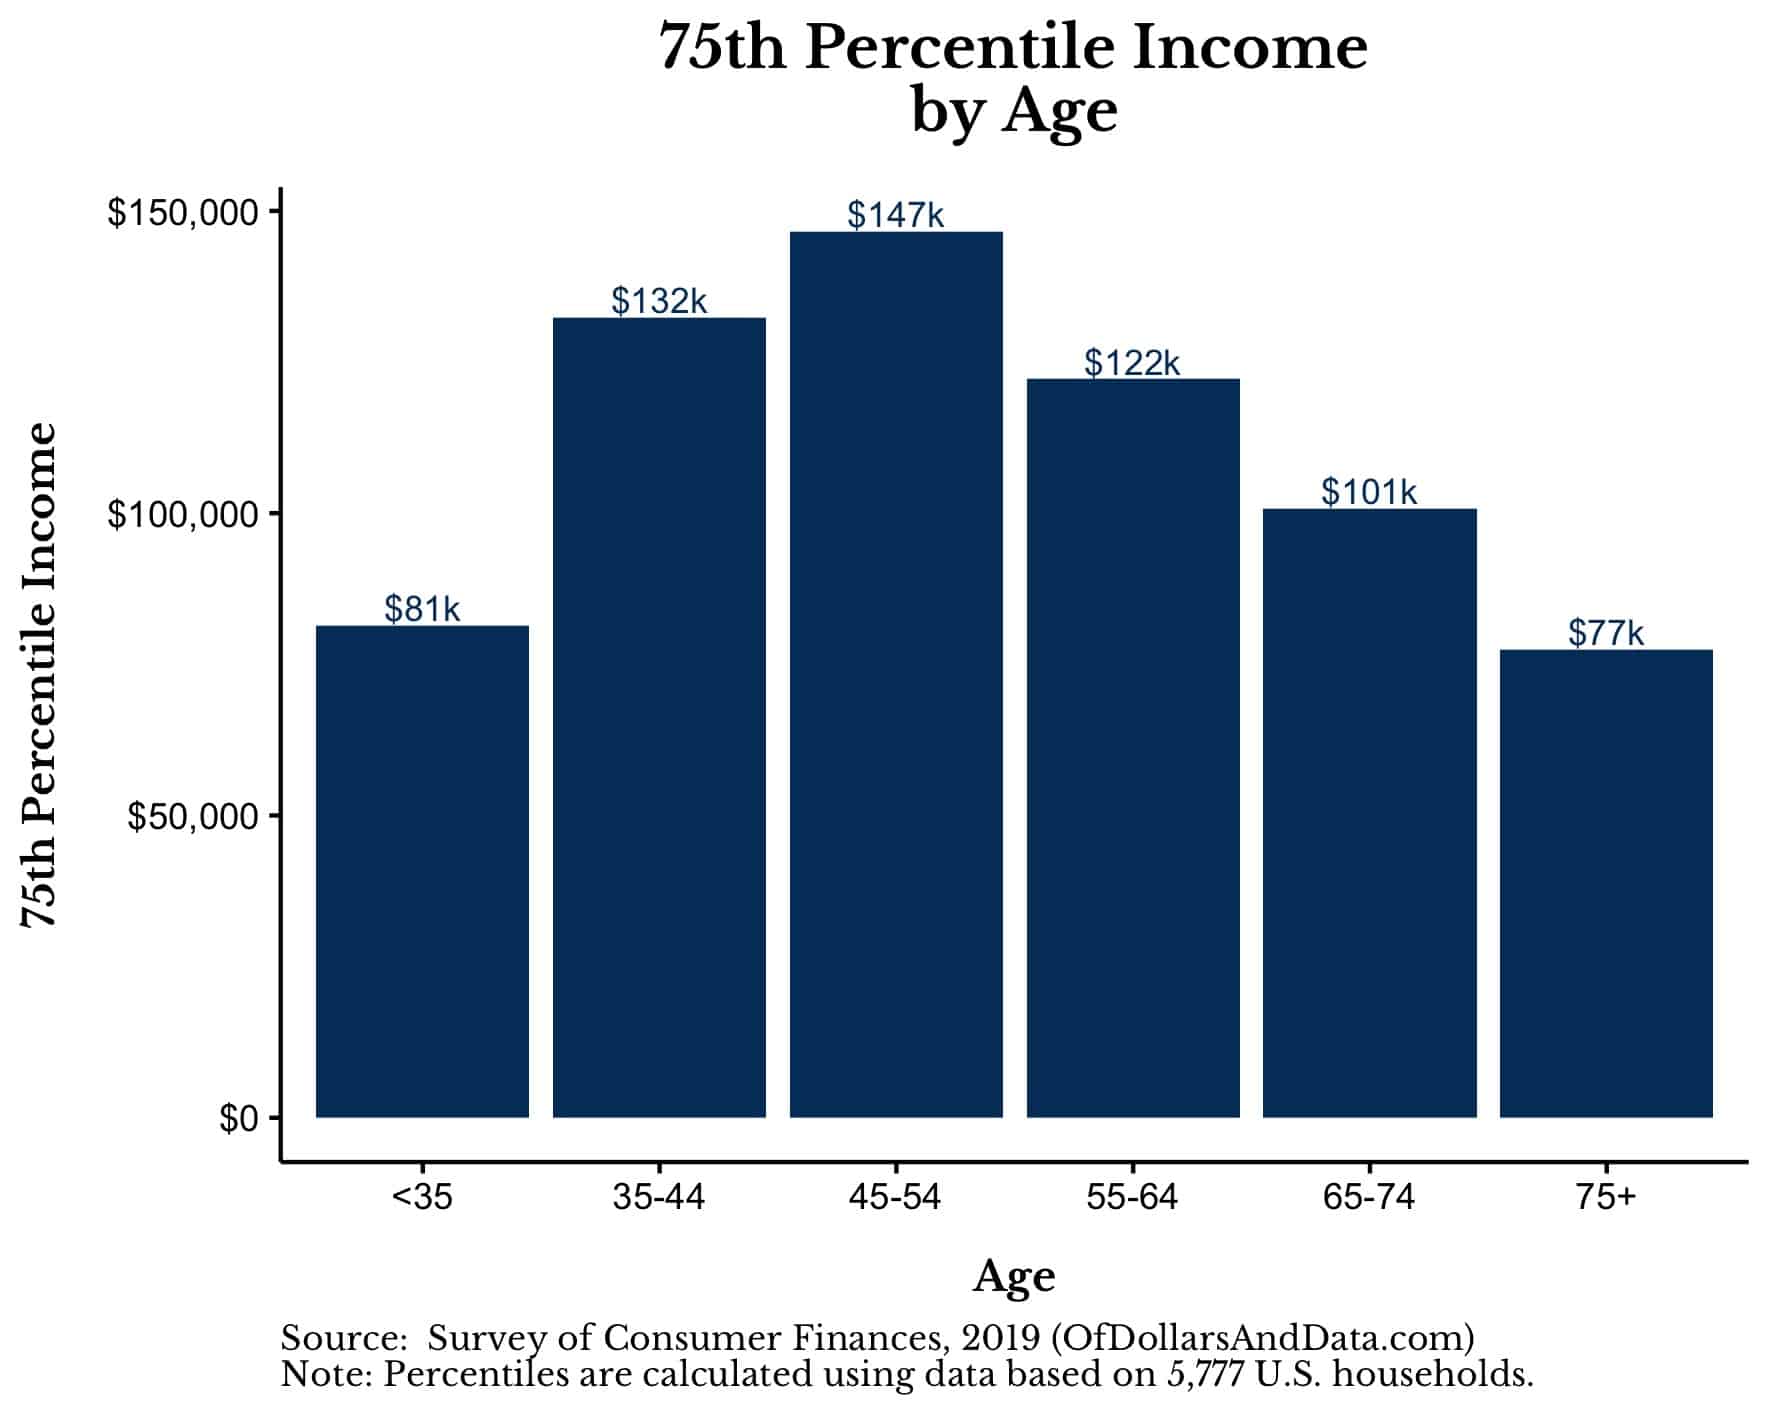 75th percentile household income by age in the U.S. from the 2019 Survey of Consumer Finances.